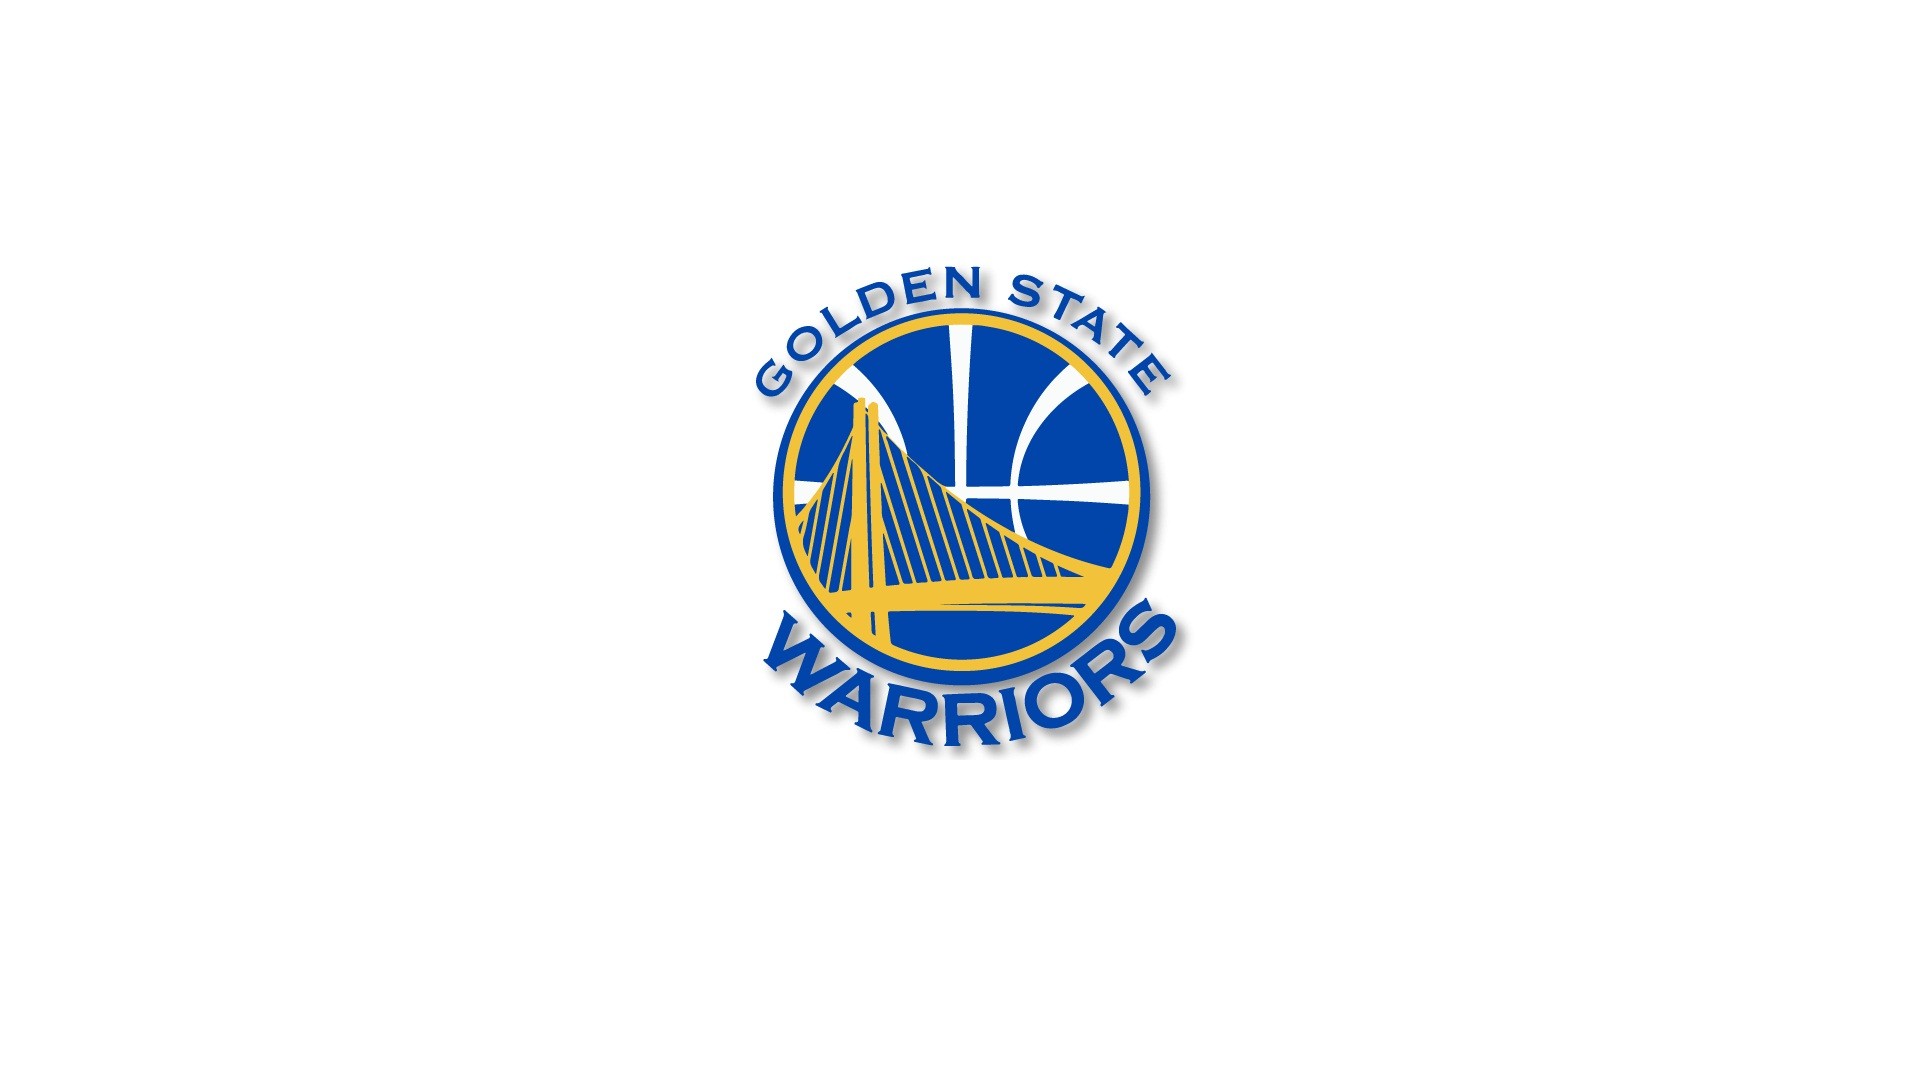 Golden State Warriors Logo HD Wallpapers with image dimensions 1920x1080 pixel. You can make this wallpaper for your Desktop Computer Backgrounds, Windows or Mac Screensavers, iPhone Lock screen, Tablet or Android and another Mobile Phone device